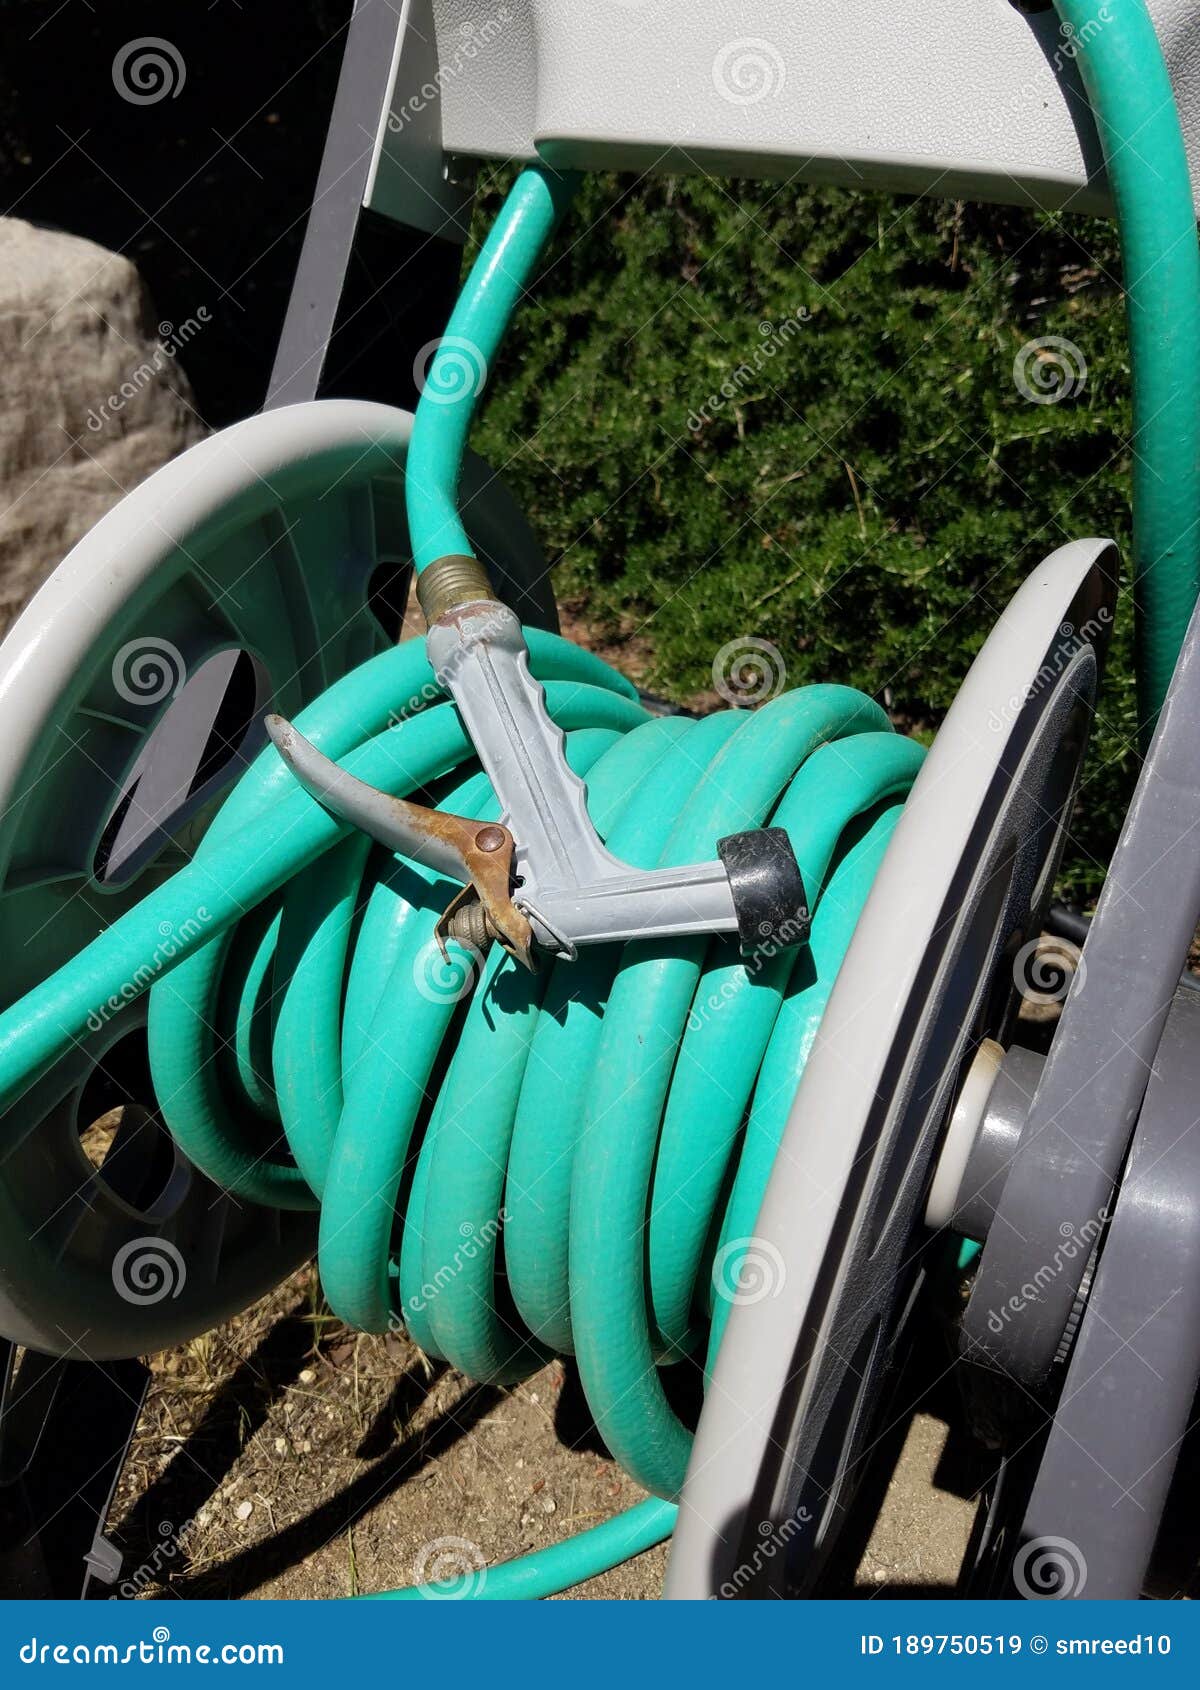 Closeup of Green Rubber Hose on Hose Reel with Spray Nozzle Stock Image -  Image of coiled, rubber: 189750519